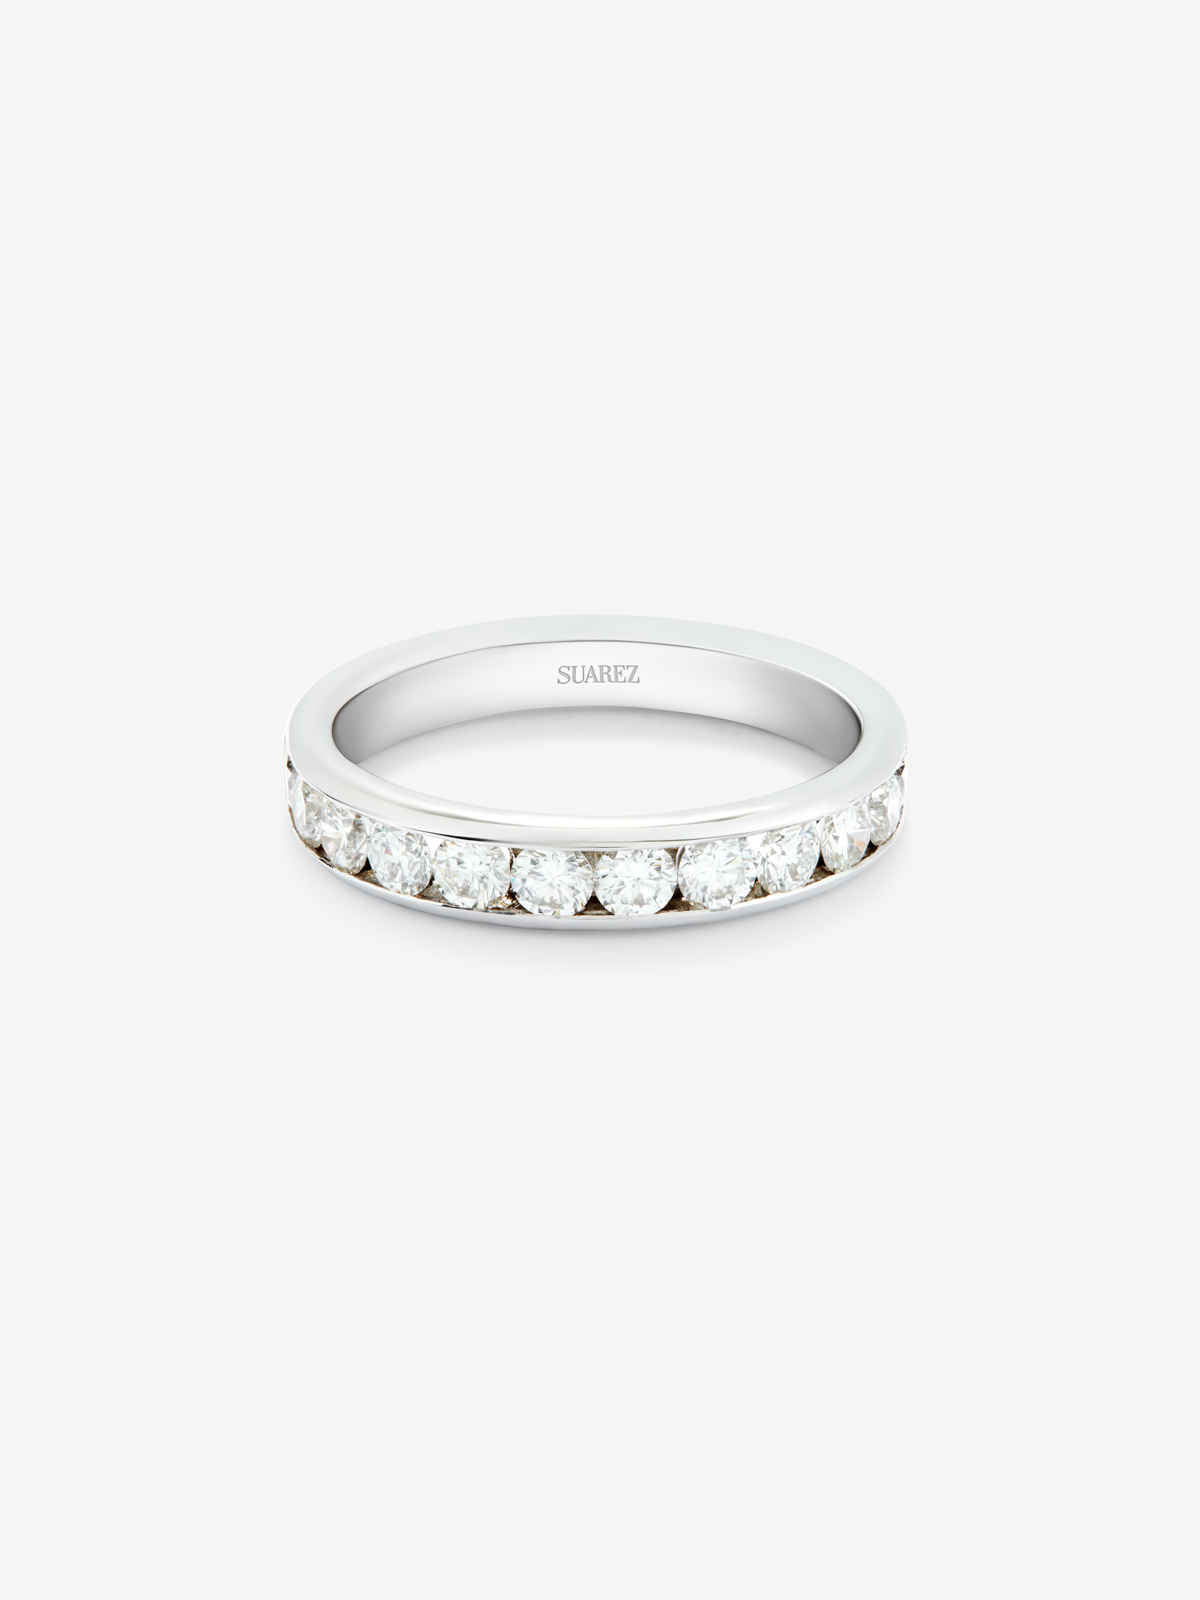 Half-eternity engagement ring in 18K white gold with diamonds on band.